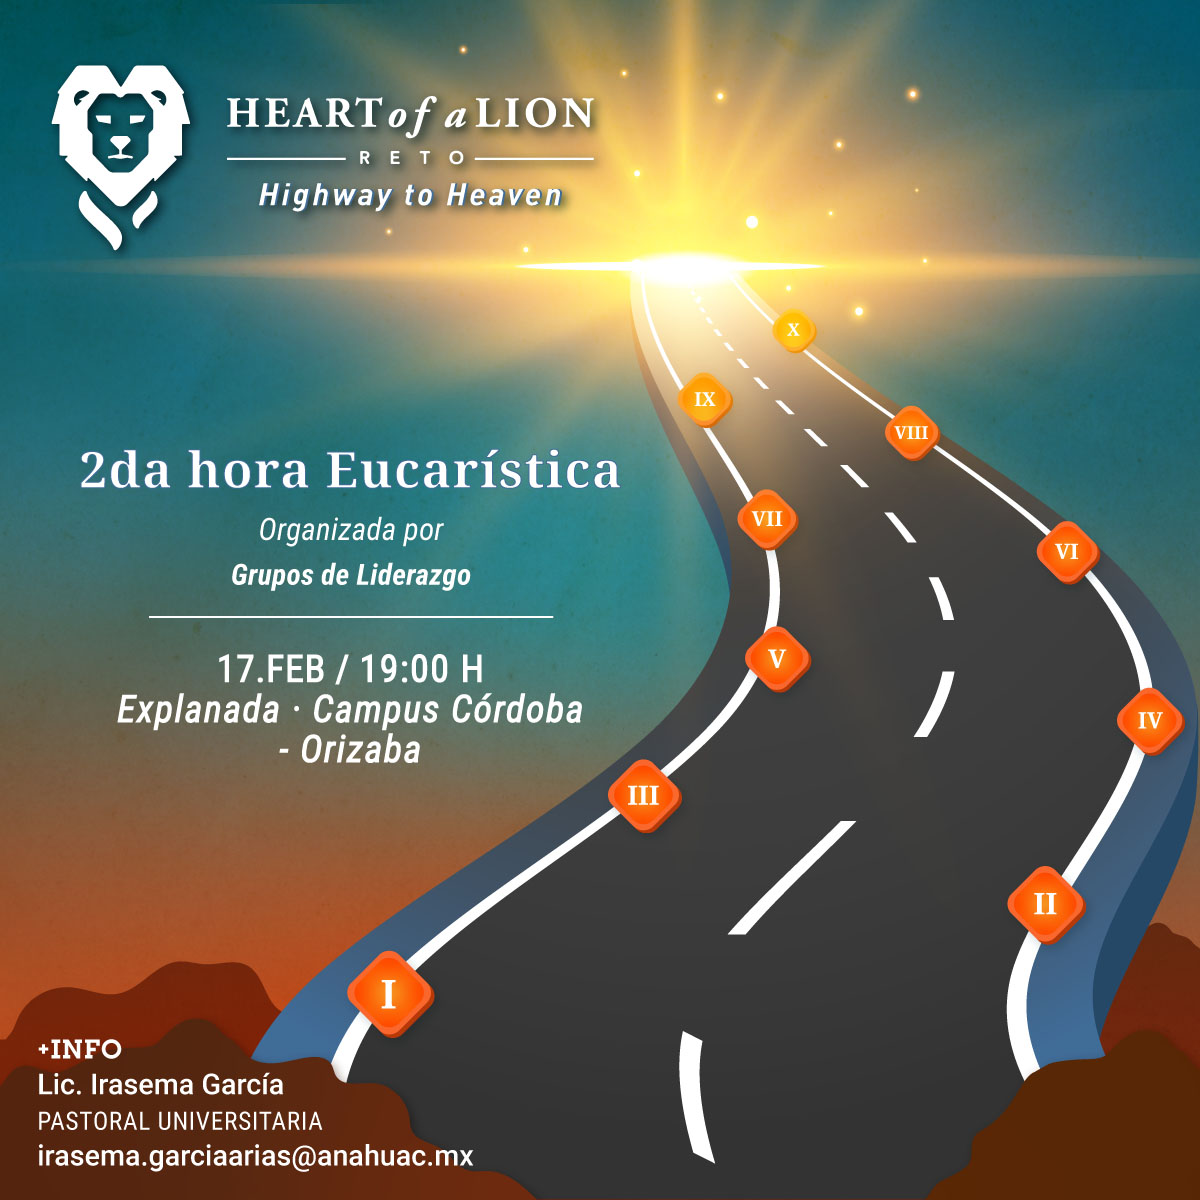 Heart of a Lion: Highway to Heaven